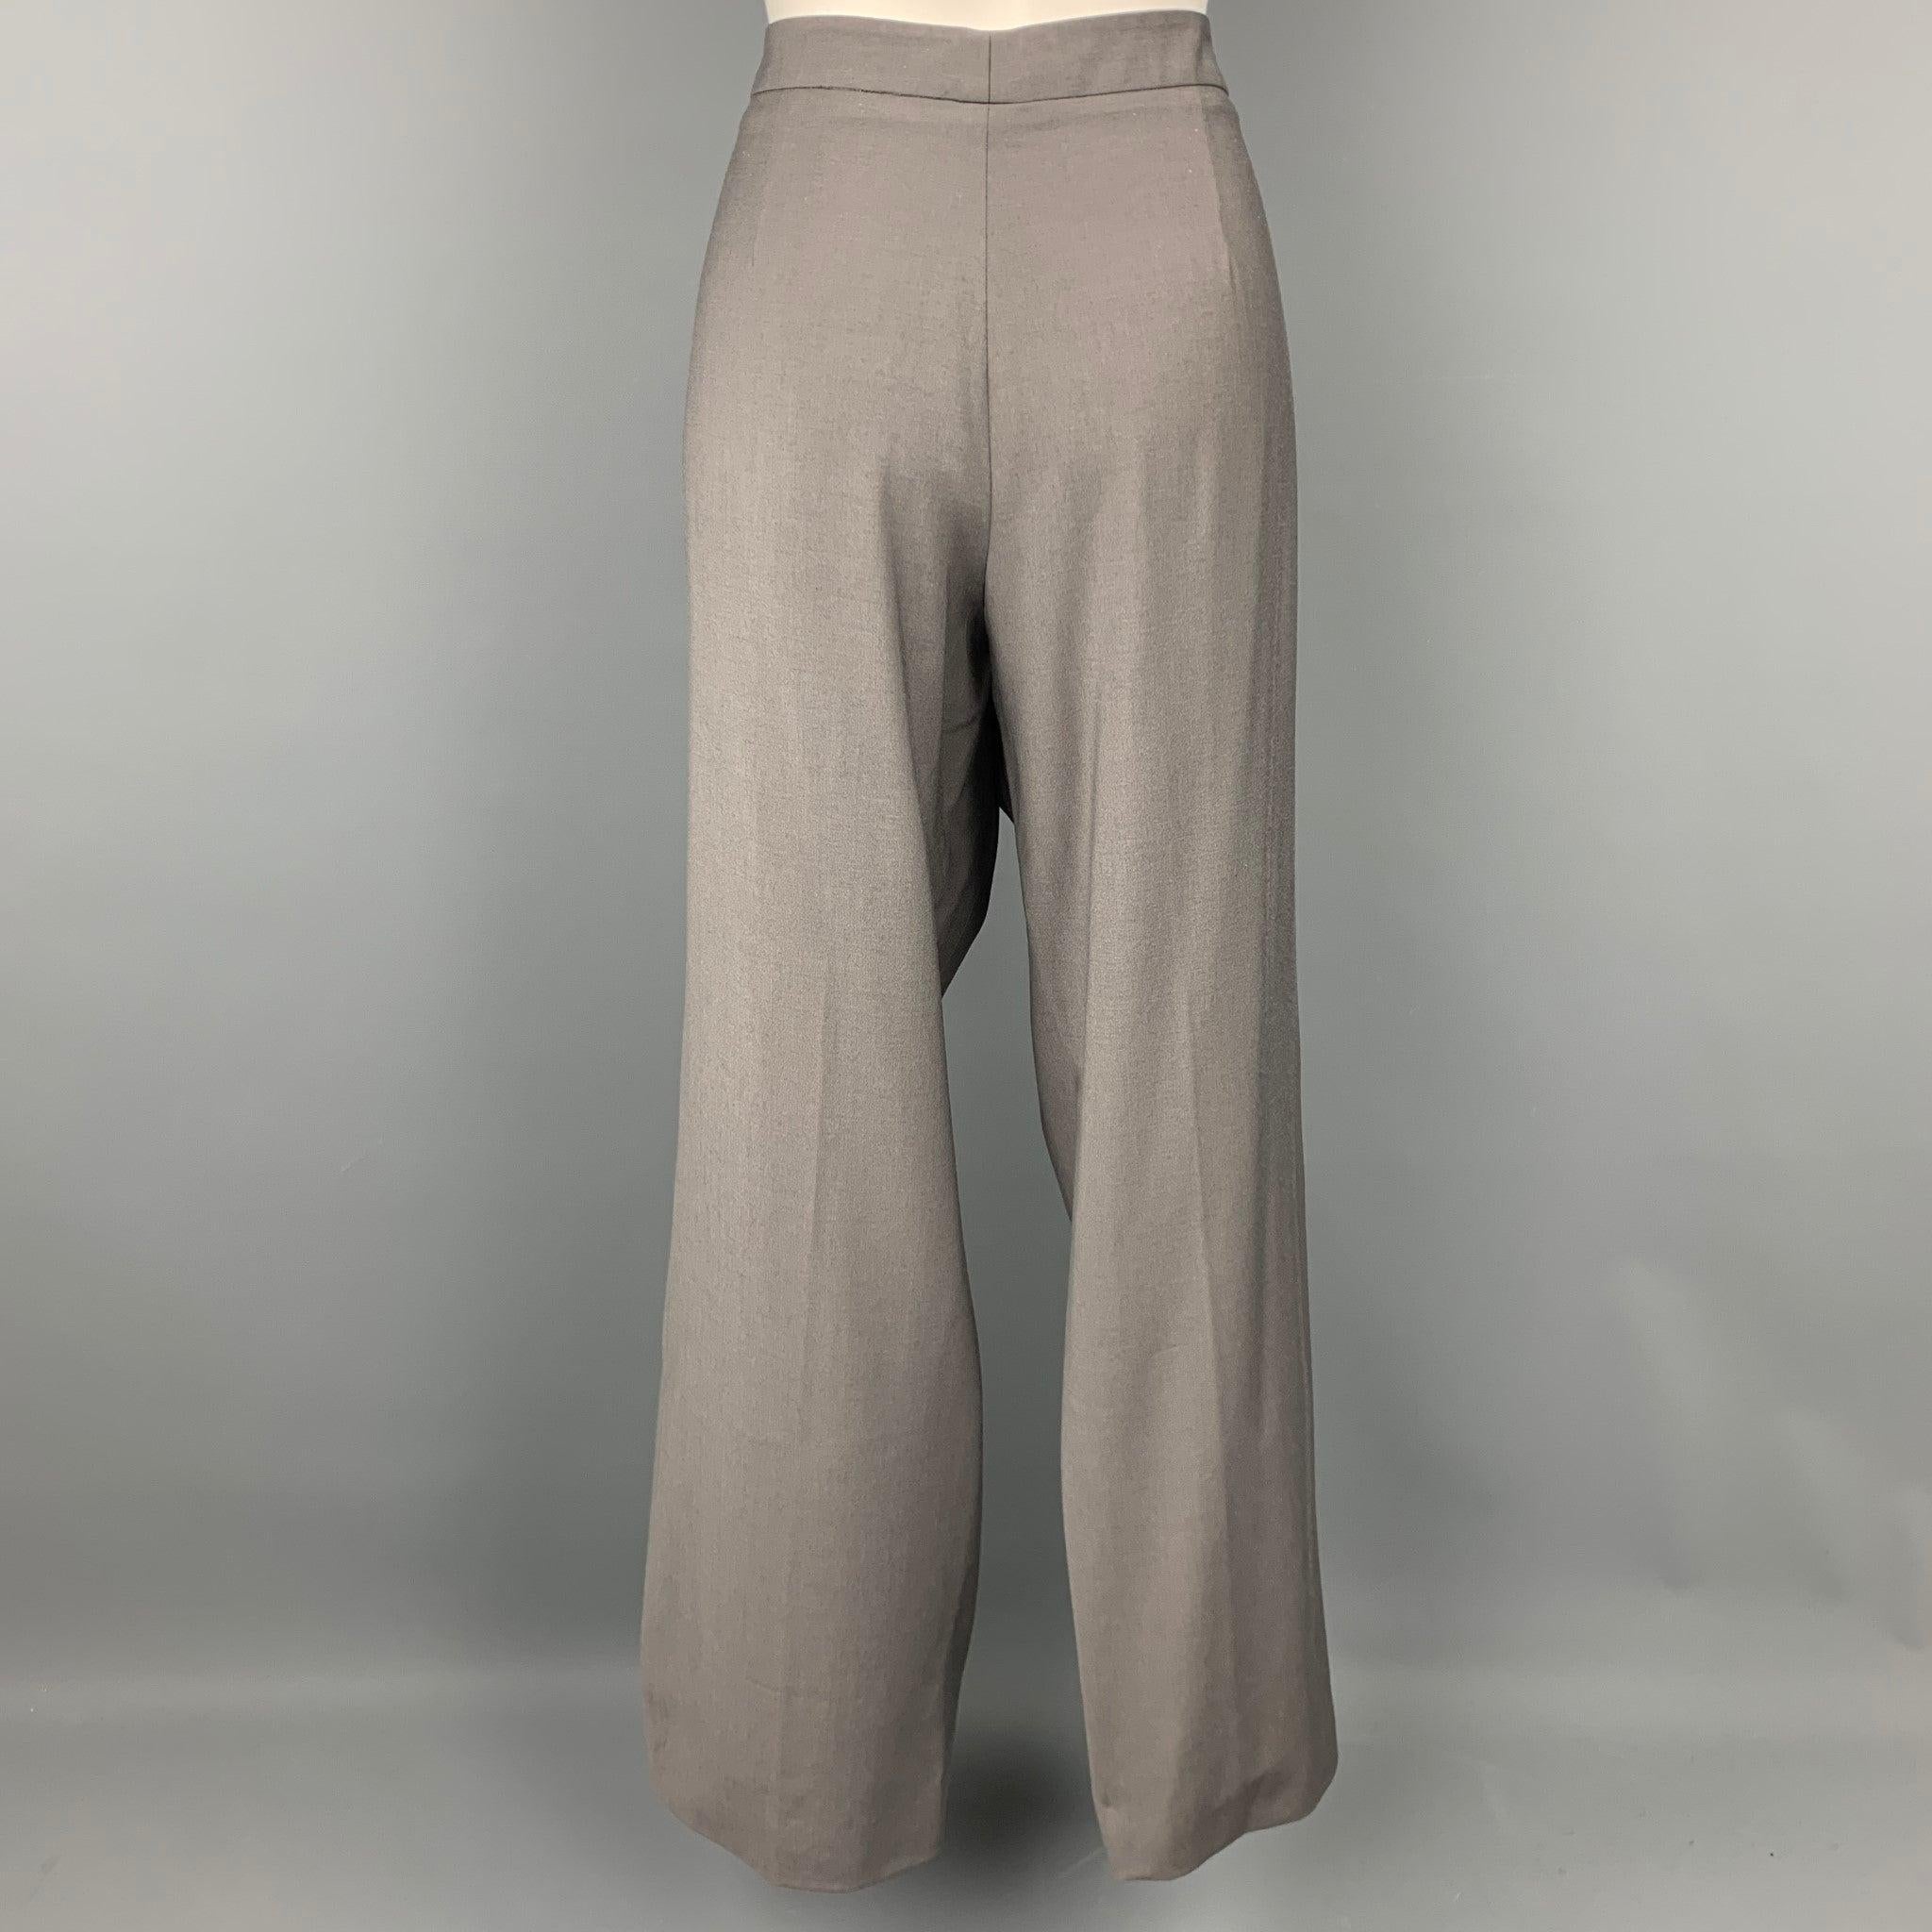 ARMANI COLLEZIONI dress pants comes in a grey wool blend featuring a wide leg style, high waisted, and a side zip up closure. Made in Italy.Good
Pre-Owned Condition. 

Marked:   14 

Measurements: 
  Waist: 34 inches  Rise: 10.5 inches  Inseam: 31